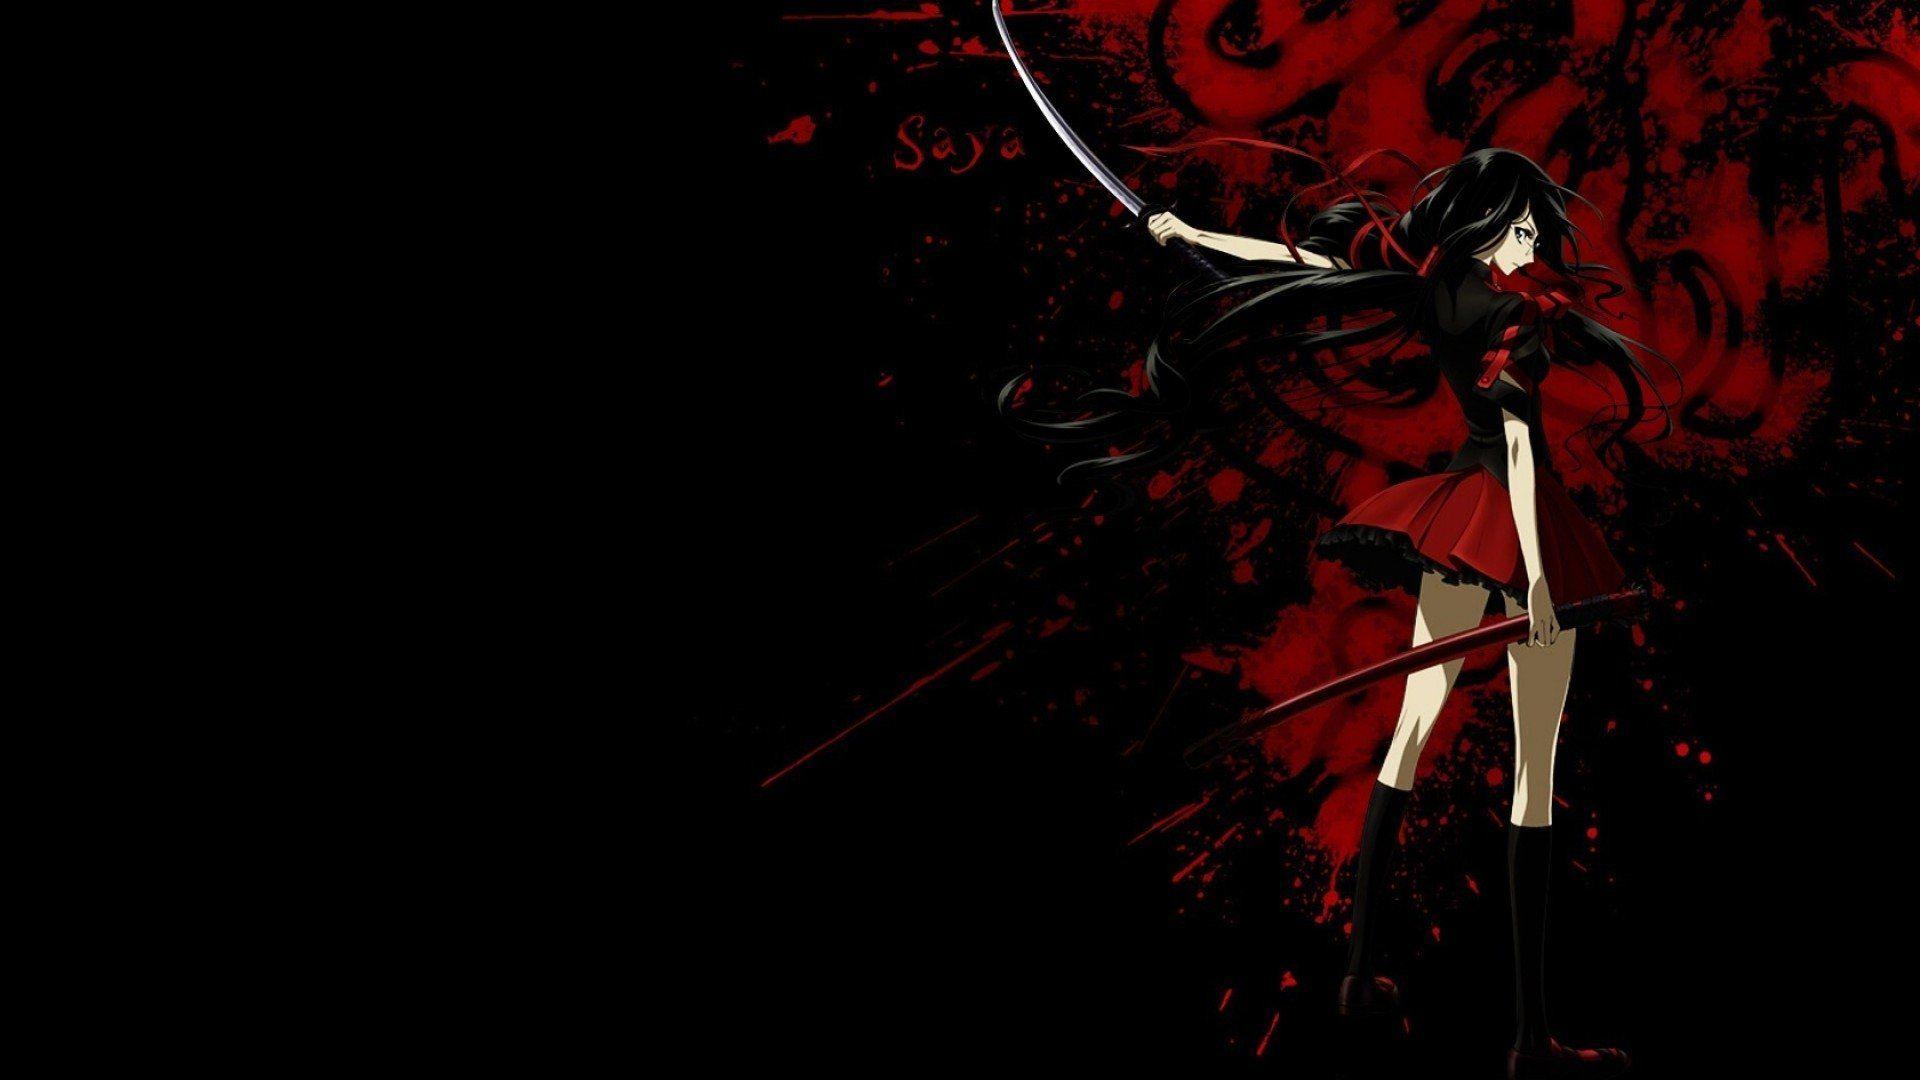 Blood C HD Wallpaper And Background Image